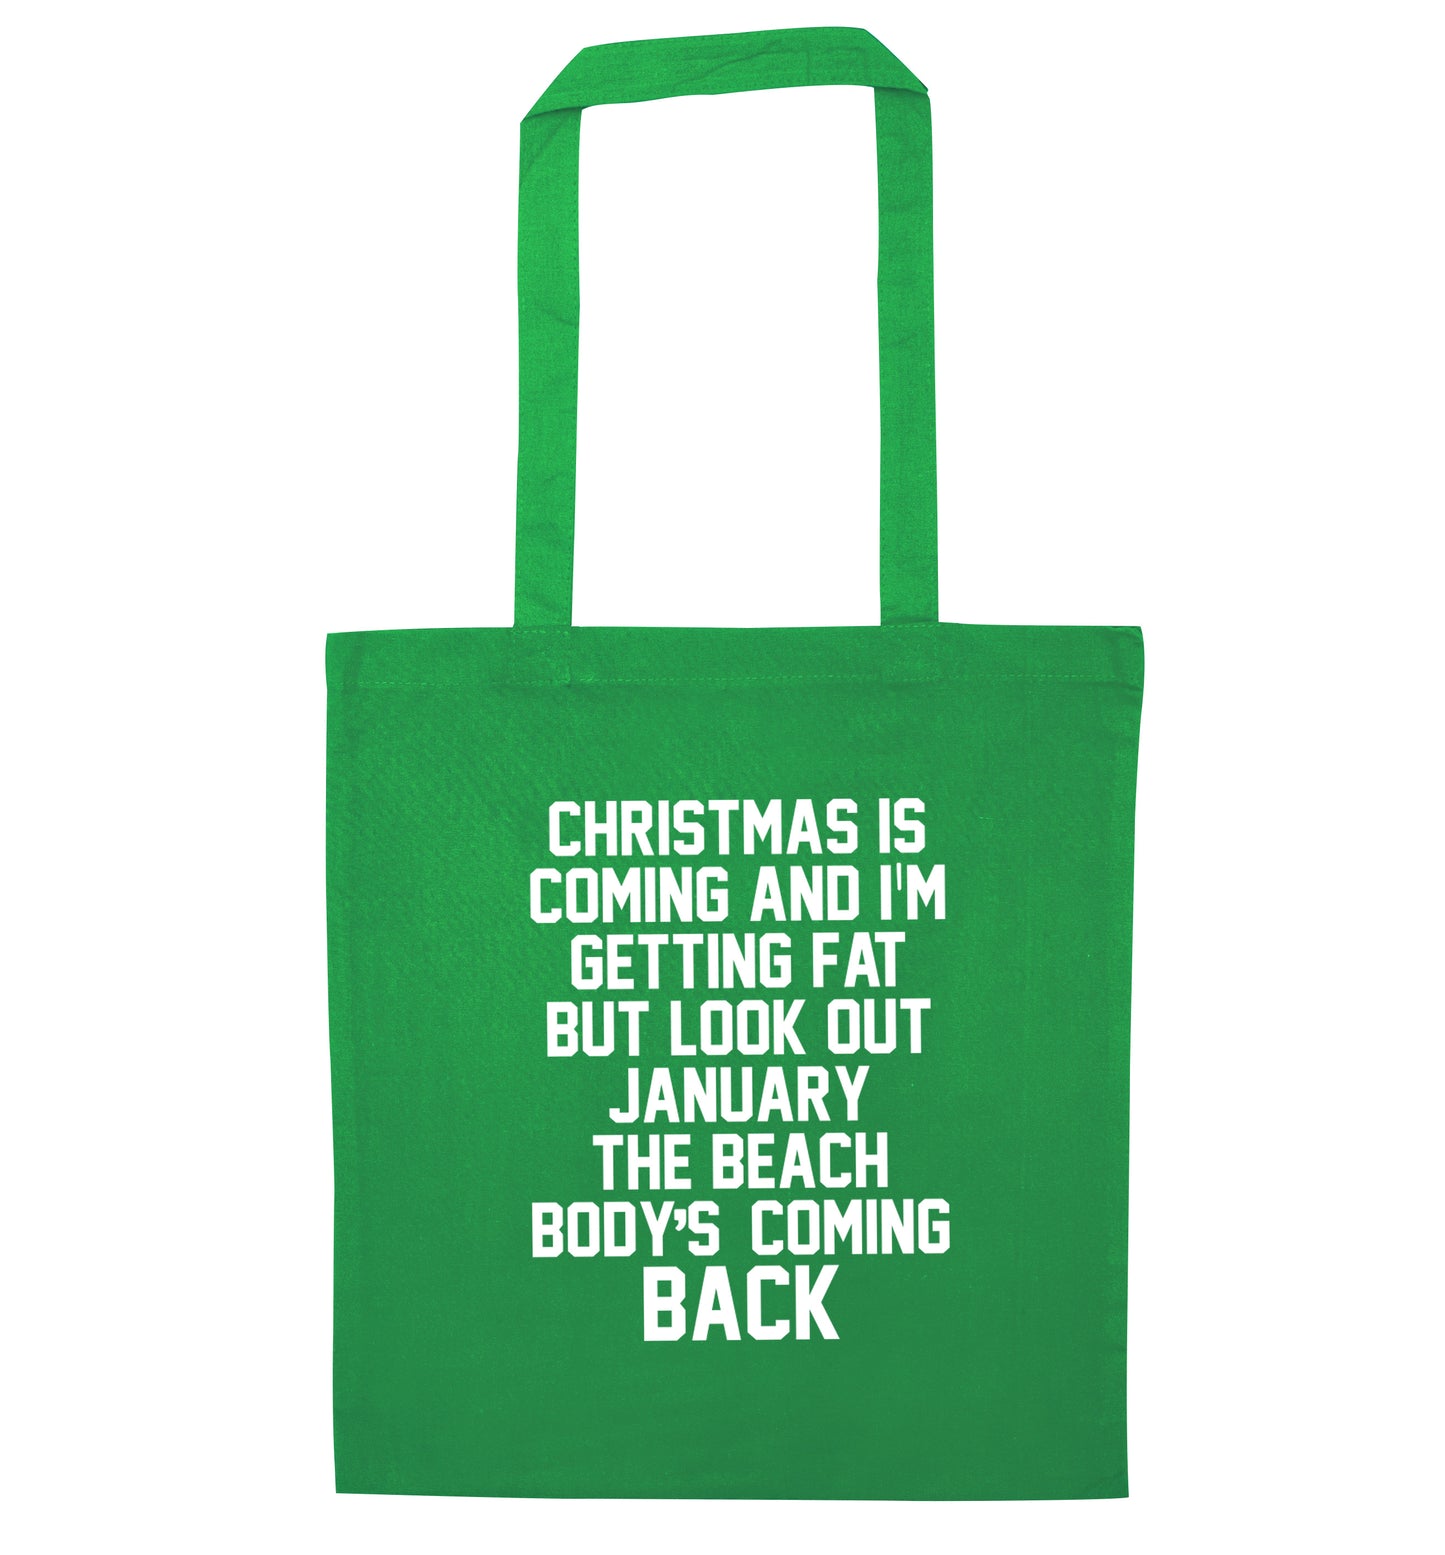 Christmas is coming and I'm getting fat but look out January the beach body's coming back! green tote bag